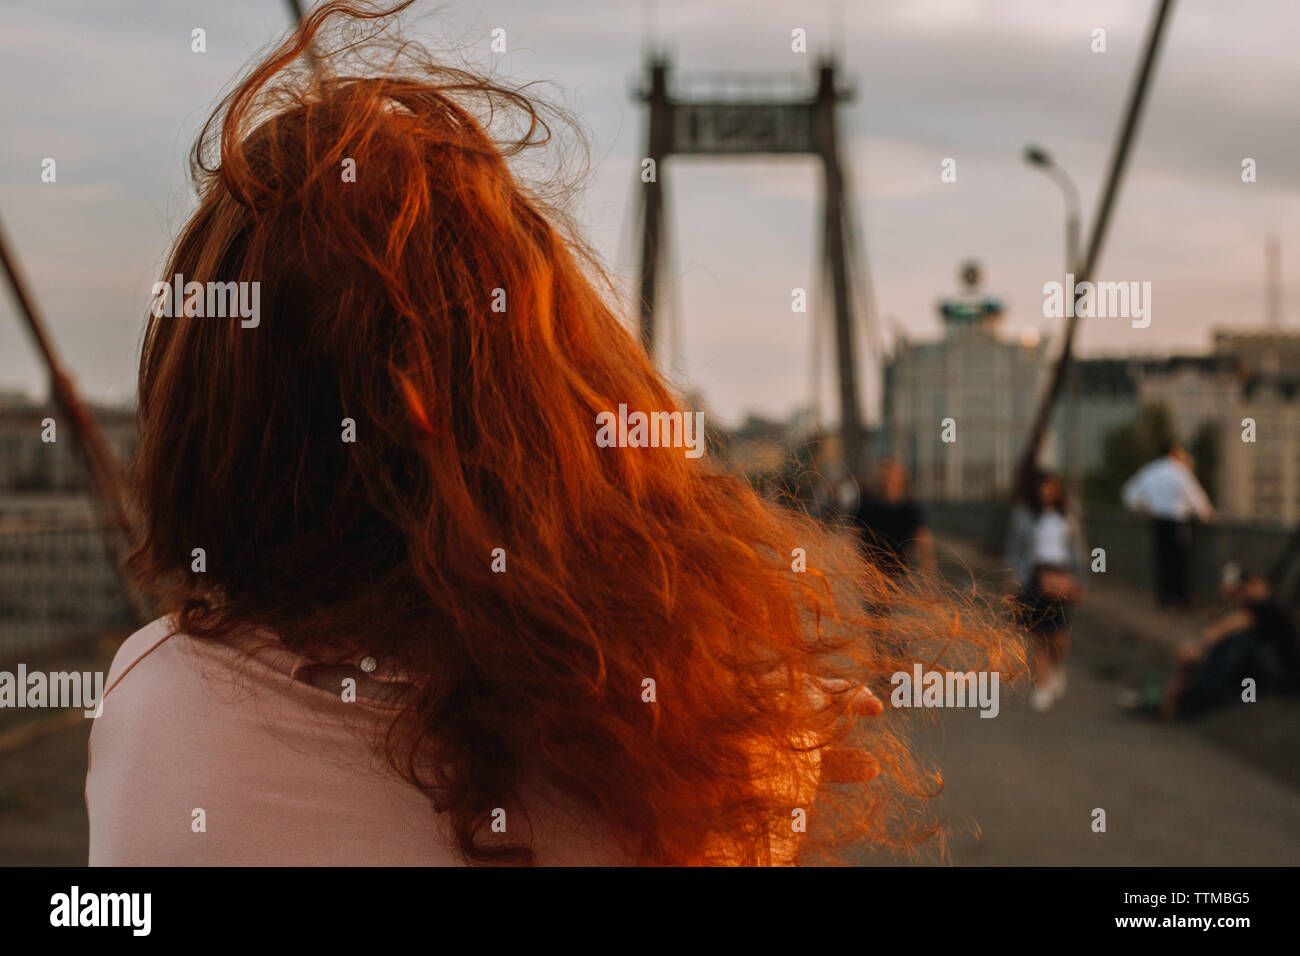 Rear view of woman with red hair walking on bridge in city Stock Photo